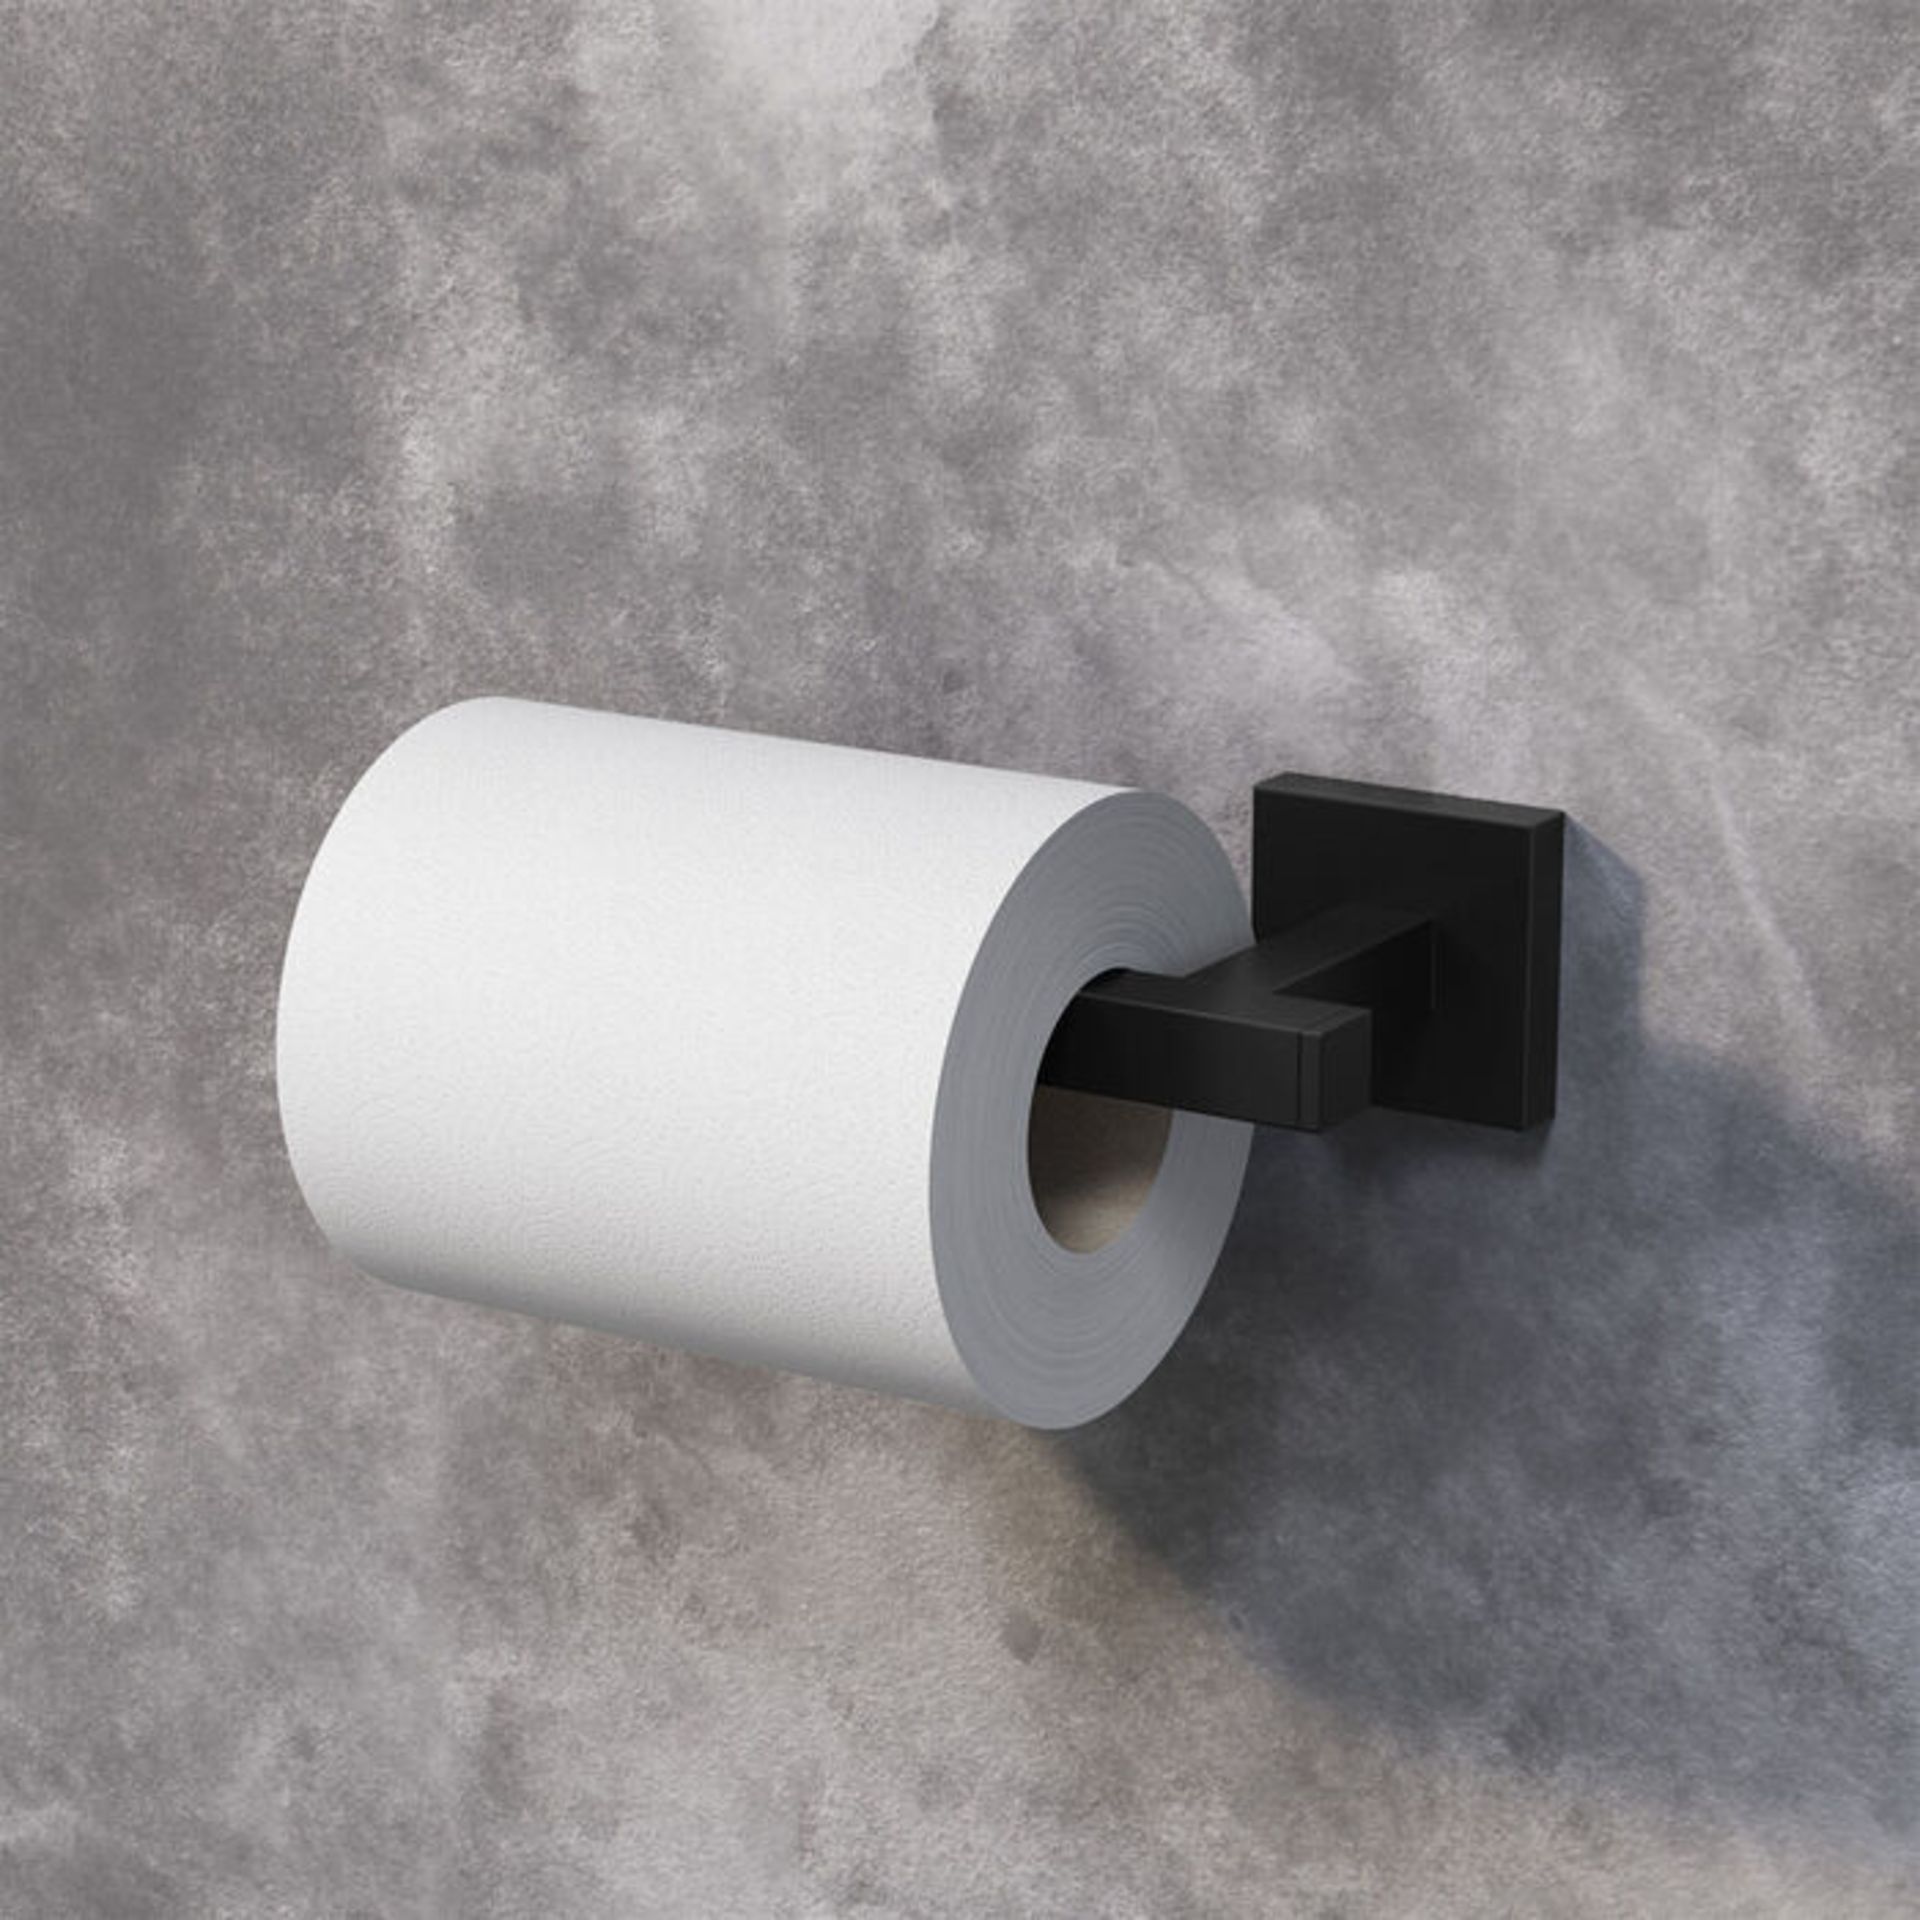 (YU1018) Iker Black Toilet Roll Holder Statement aesthetic for minimalist appeal Luxurious, c... - Image 3 of 3